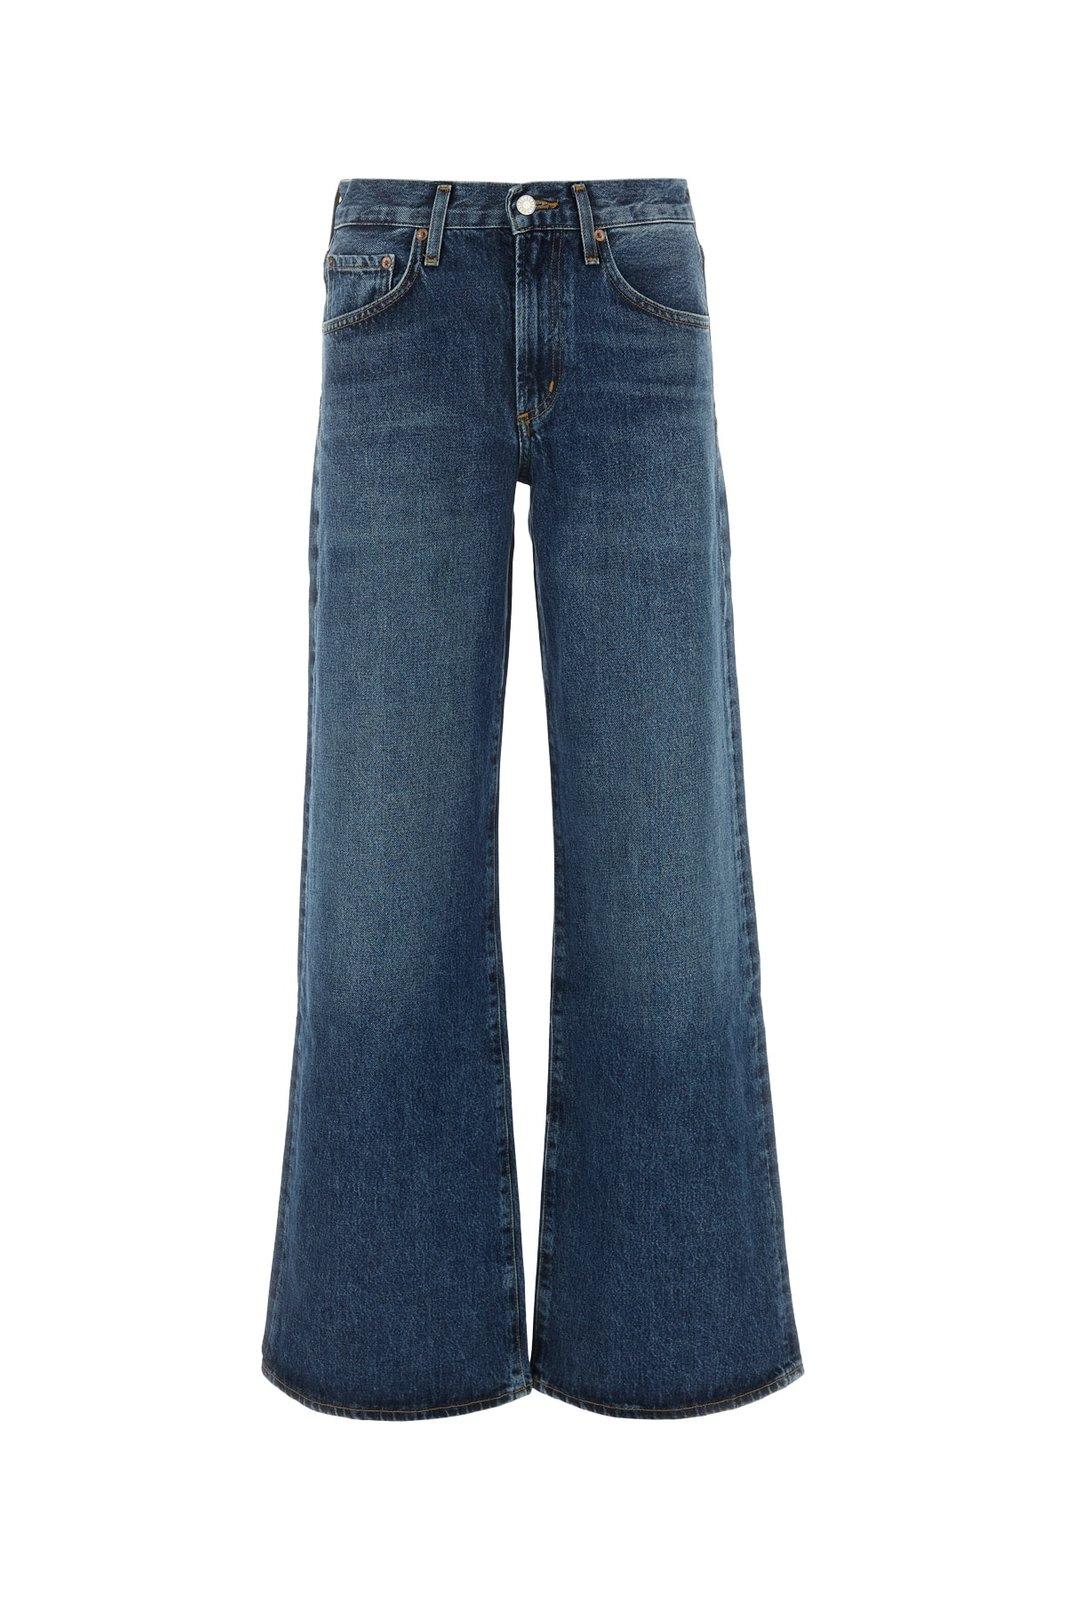 AGOLDE CLARA LOW-RISE FLARED JEANS